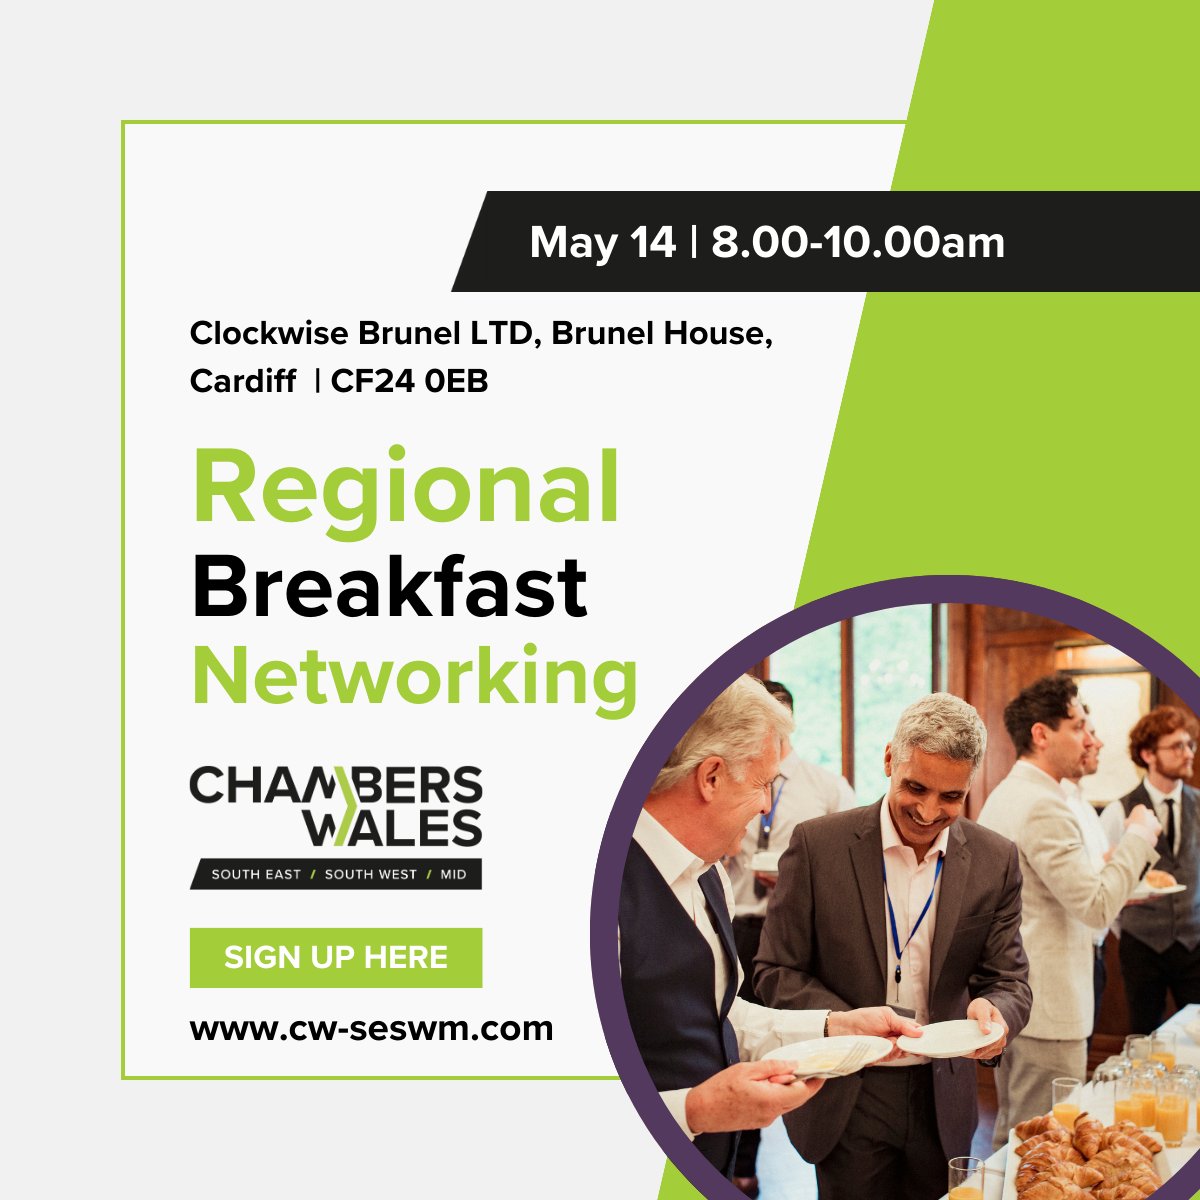 Our monthly breakfast networking event is back on 14 May! Sign up for a unique opportunity to meet likeminded Welsh businesses: cw-seswm.com/events/